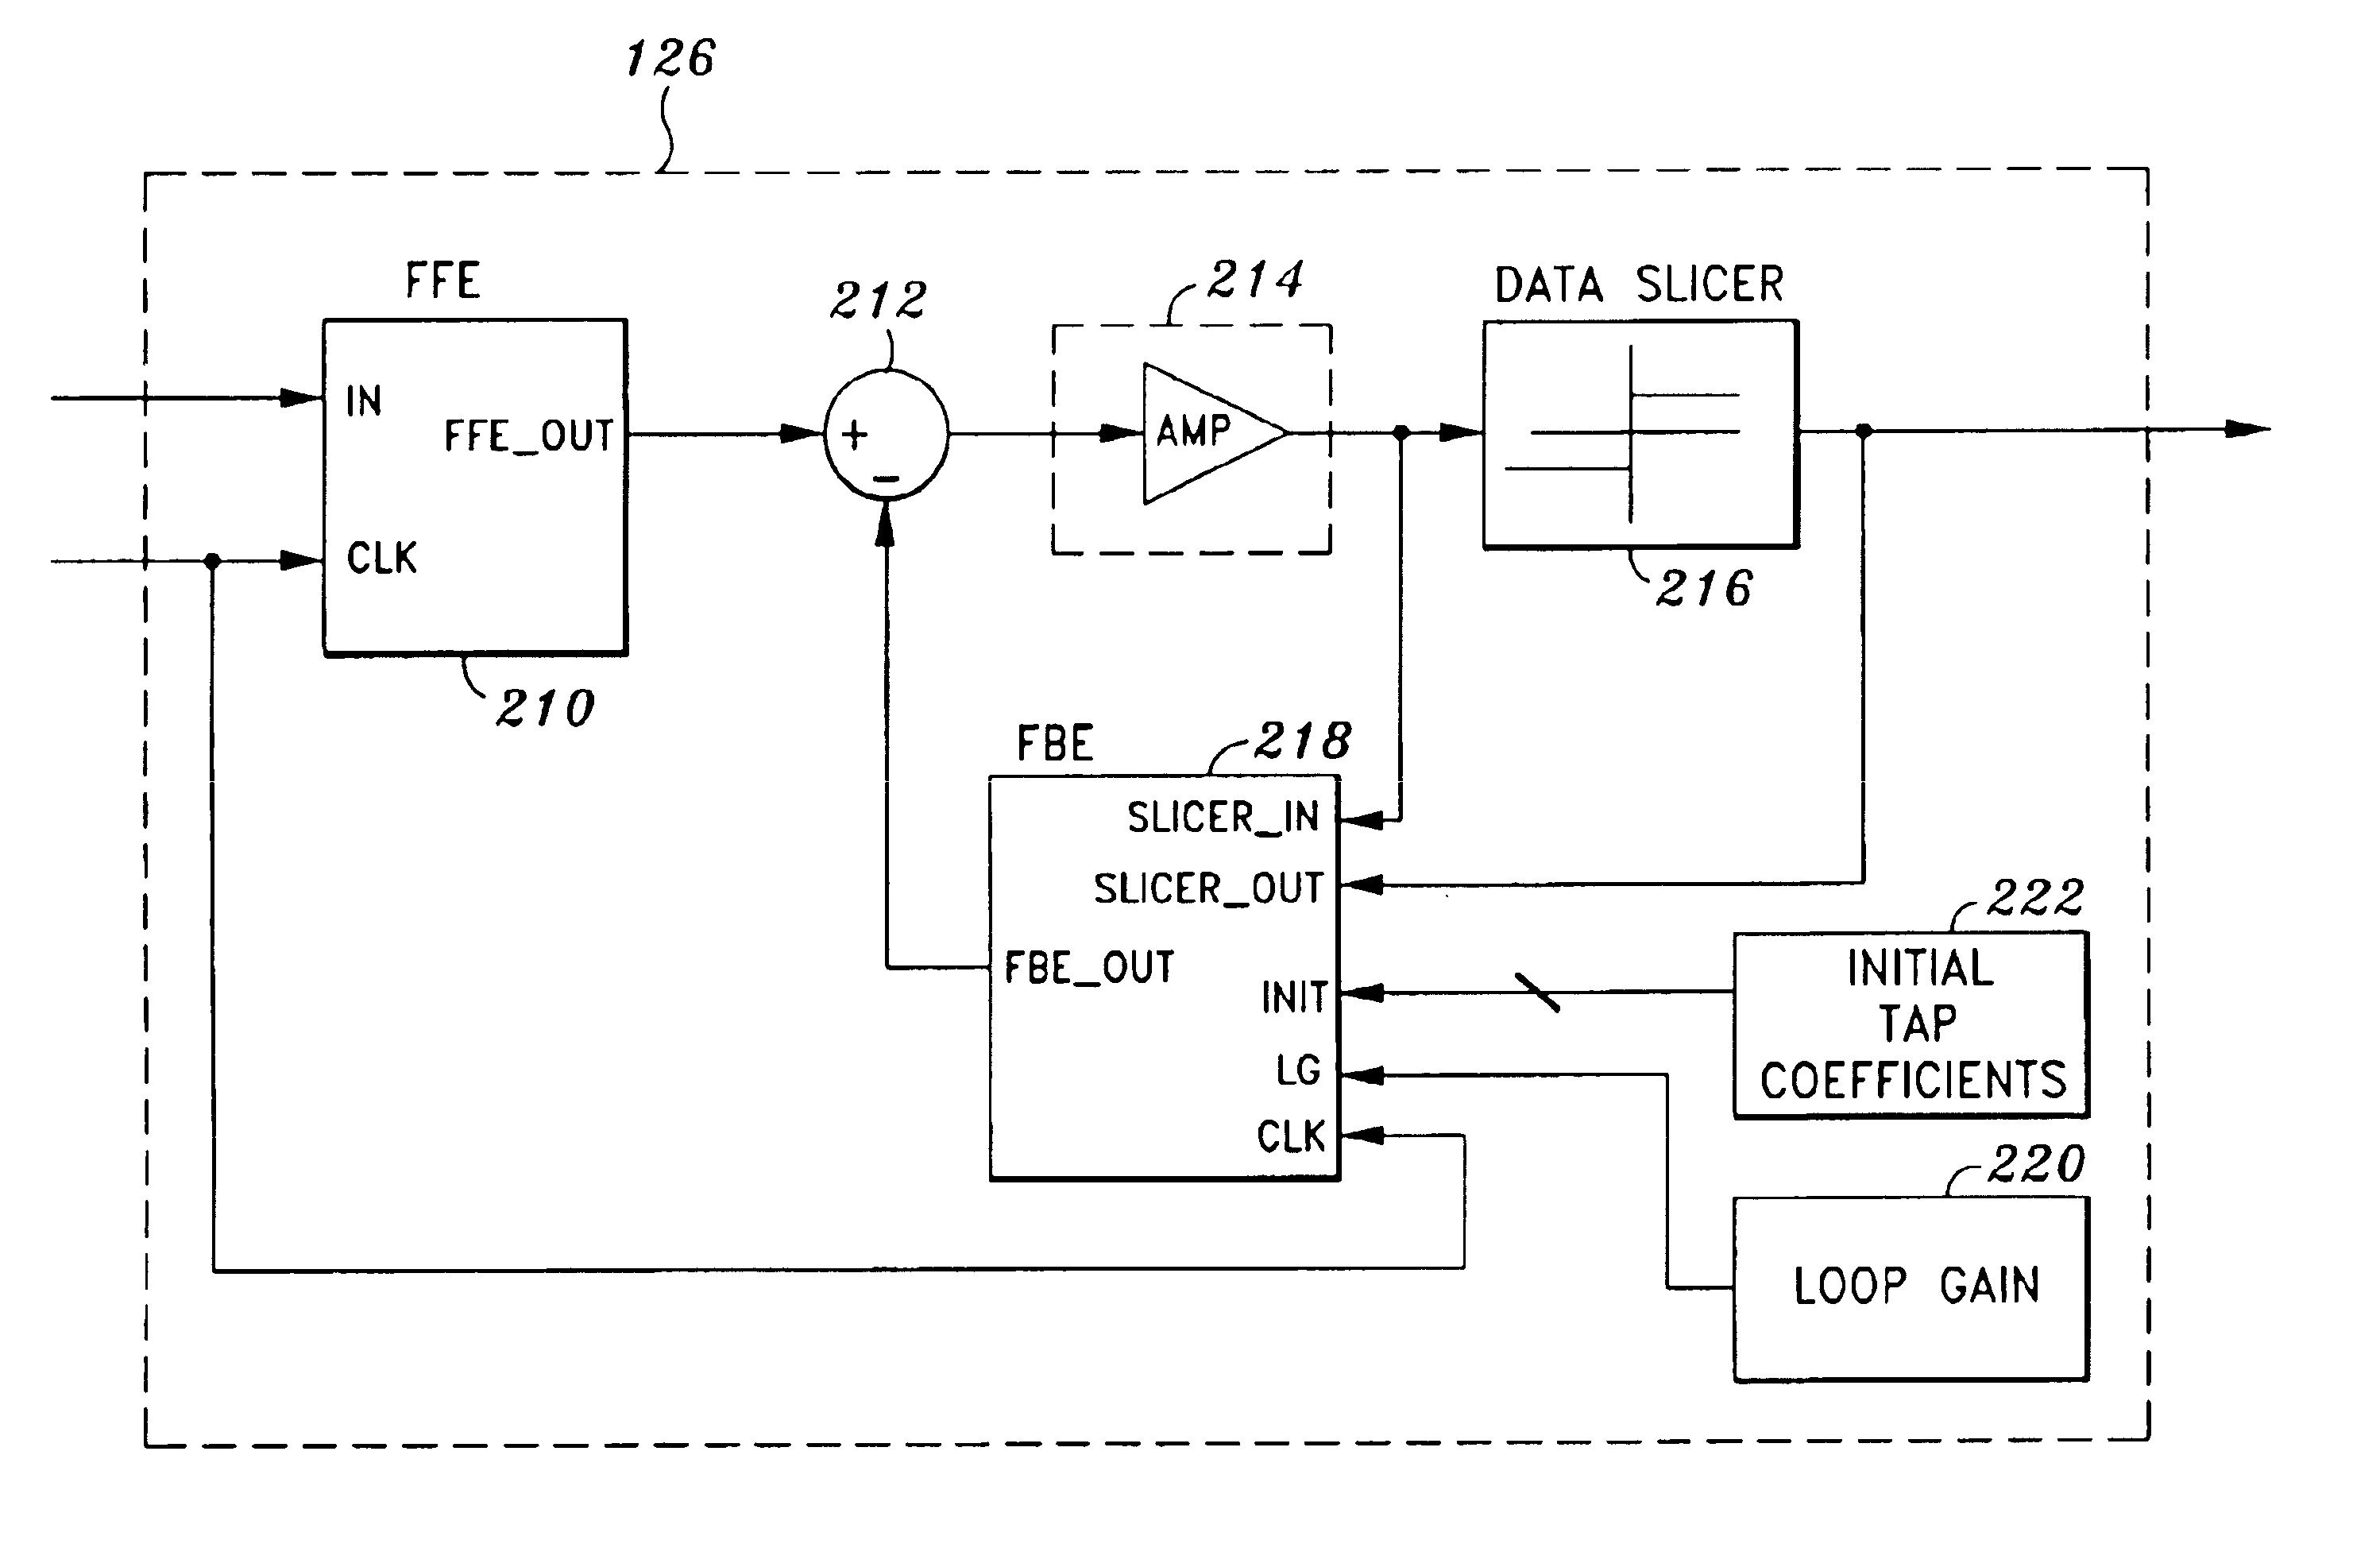 Data detection in optical disk drives using decision feedback equalization